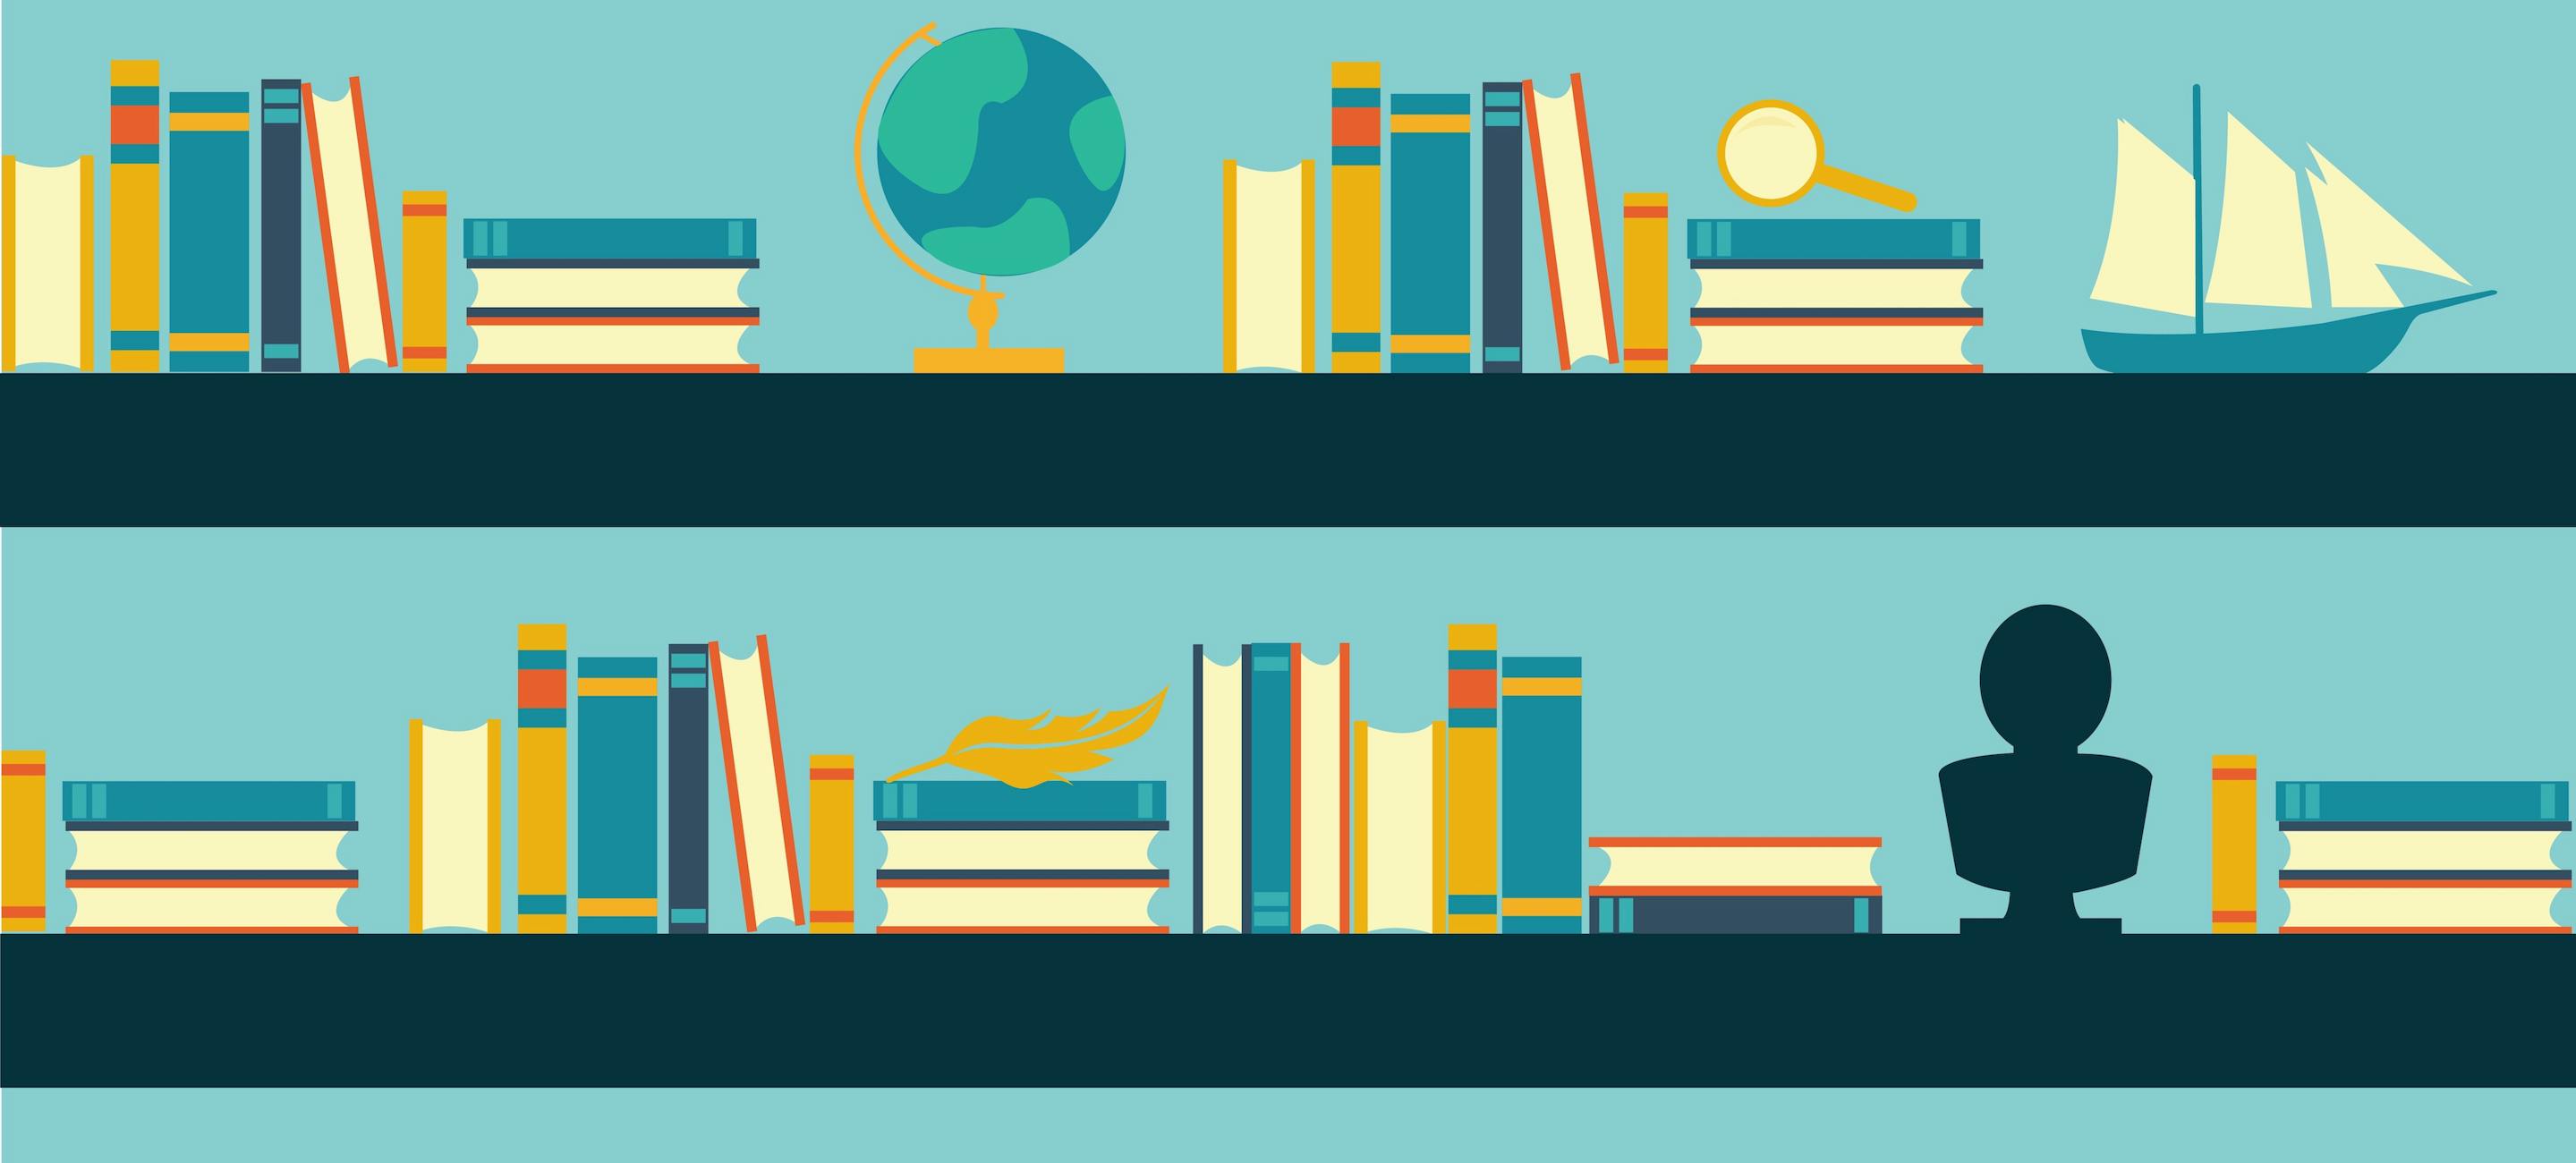 reading into history header showing a bookcase with books and objects on it